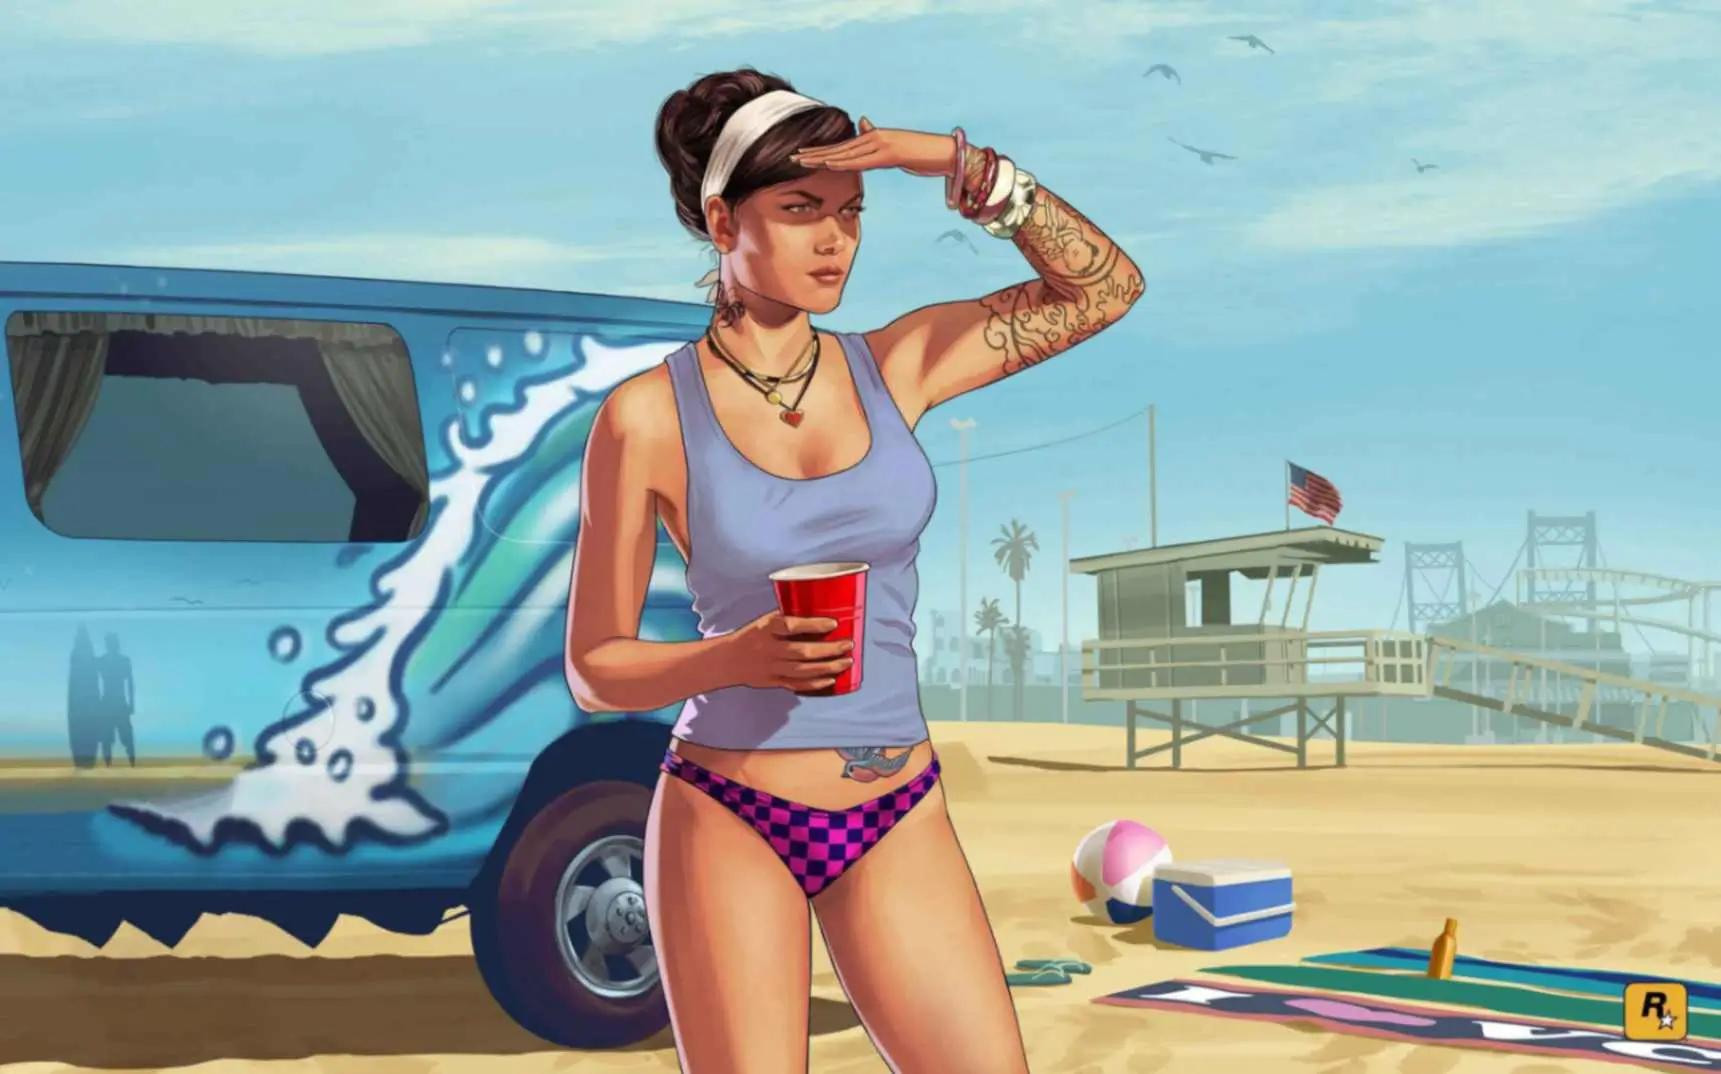 Grand Theft Auto V (GTA 5) System Requirements for PC Games minimum, recommended specifications for Windows, CPU, OS, Processor, RAM Memory, Storage, and GPU.